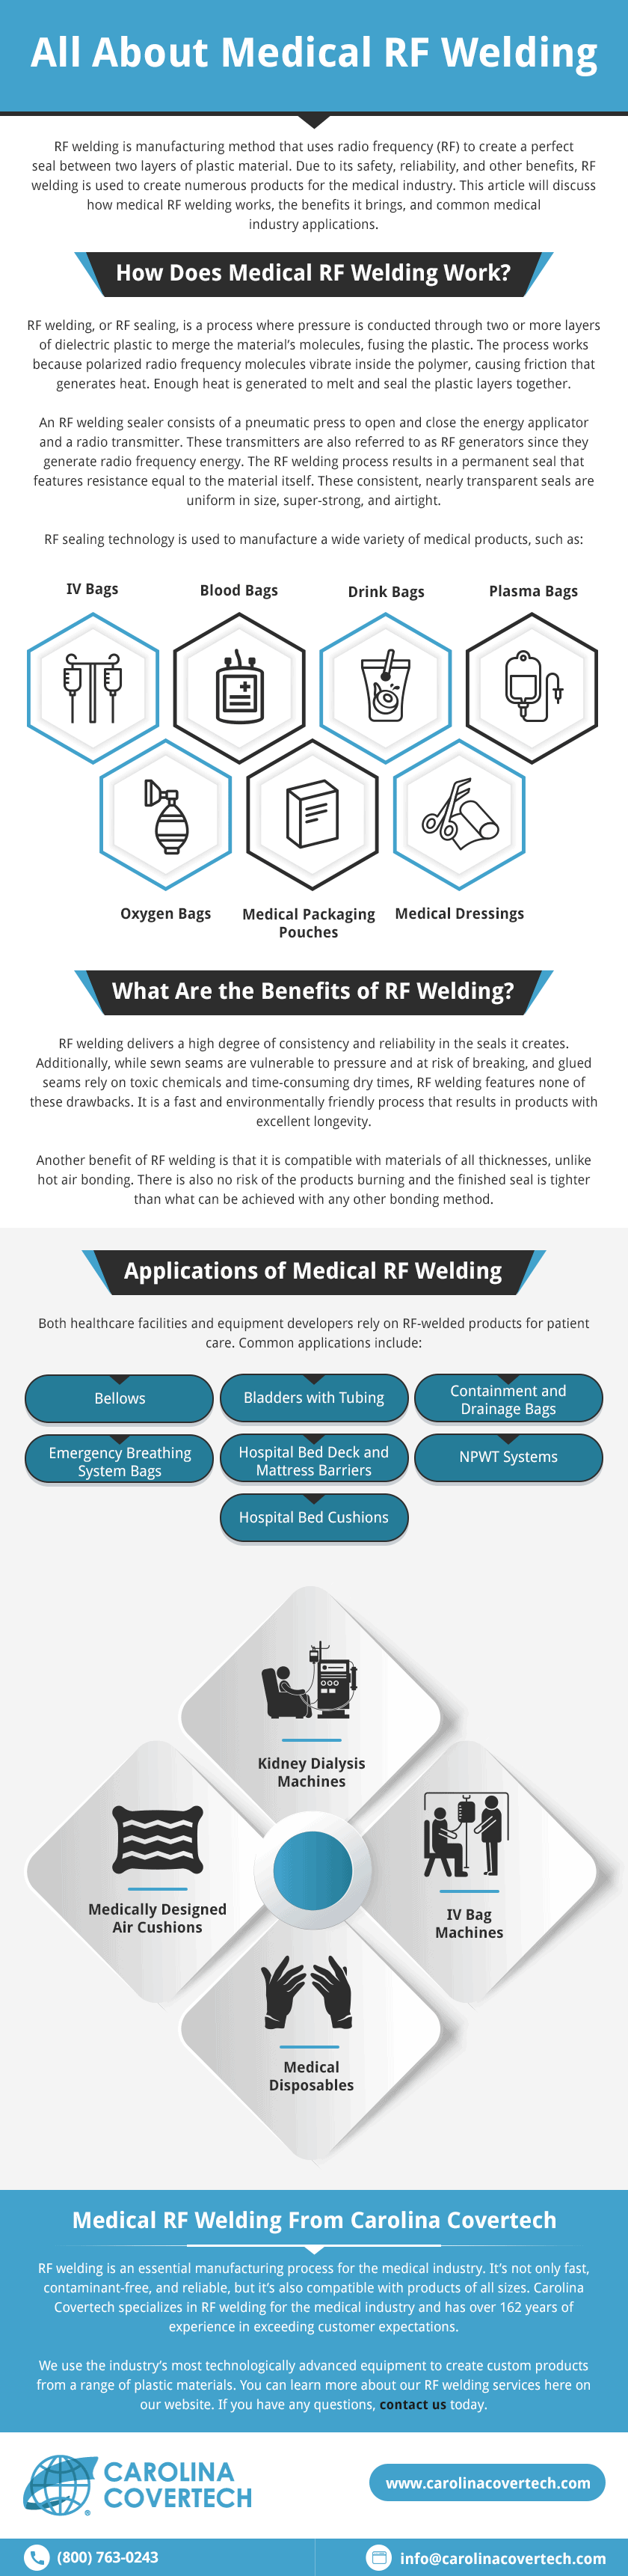 All About Medical RF Welding